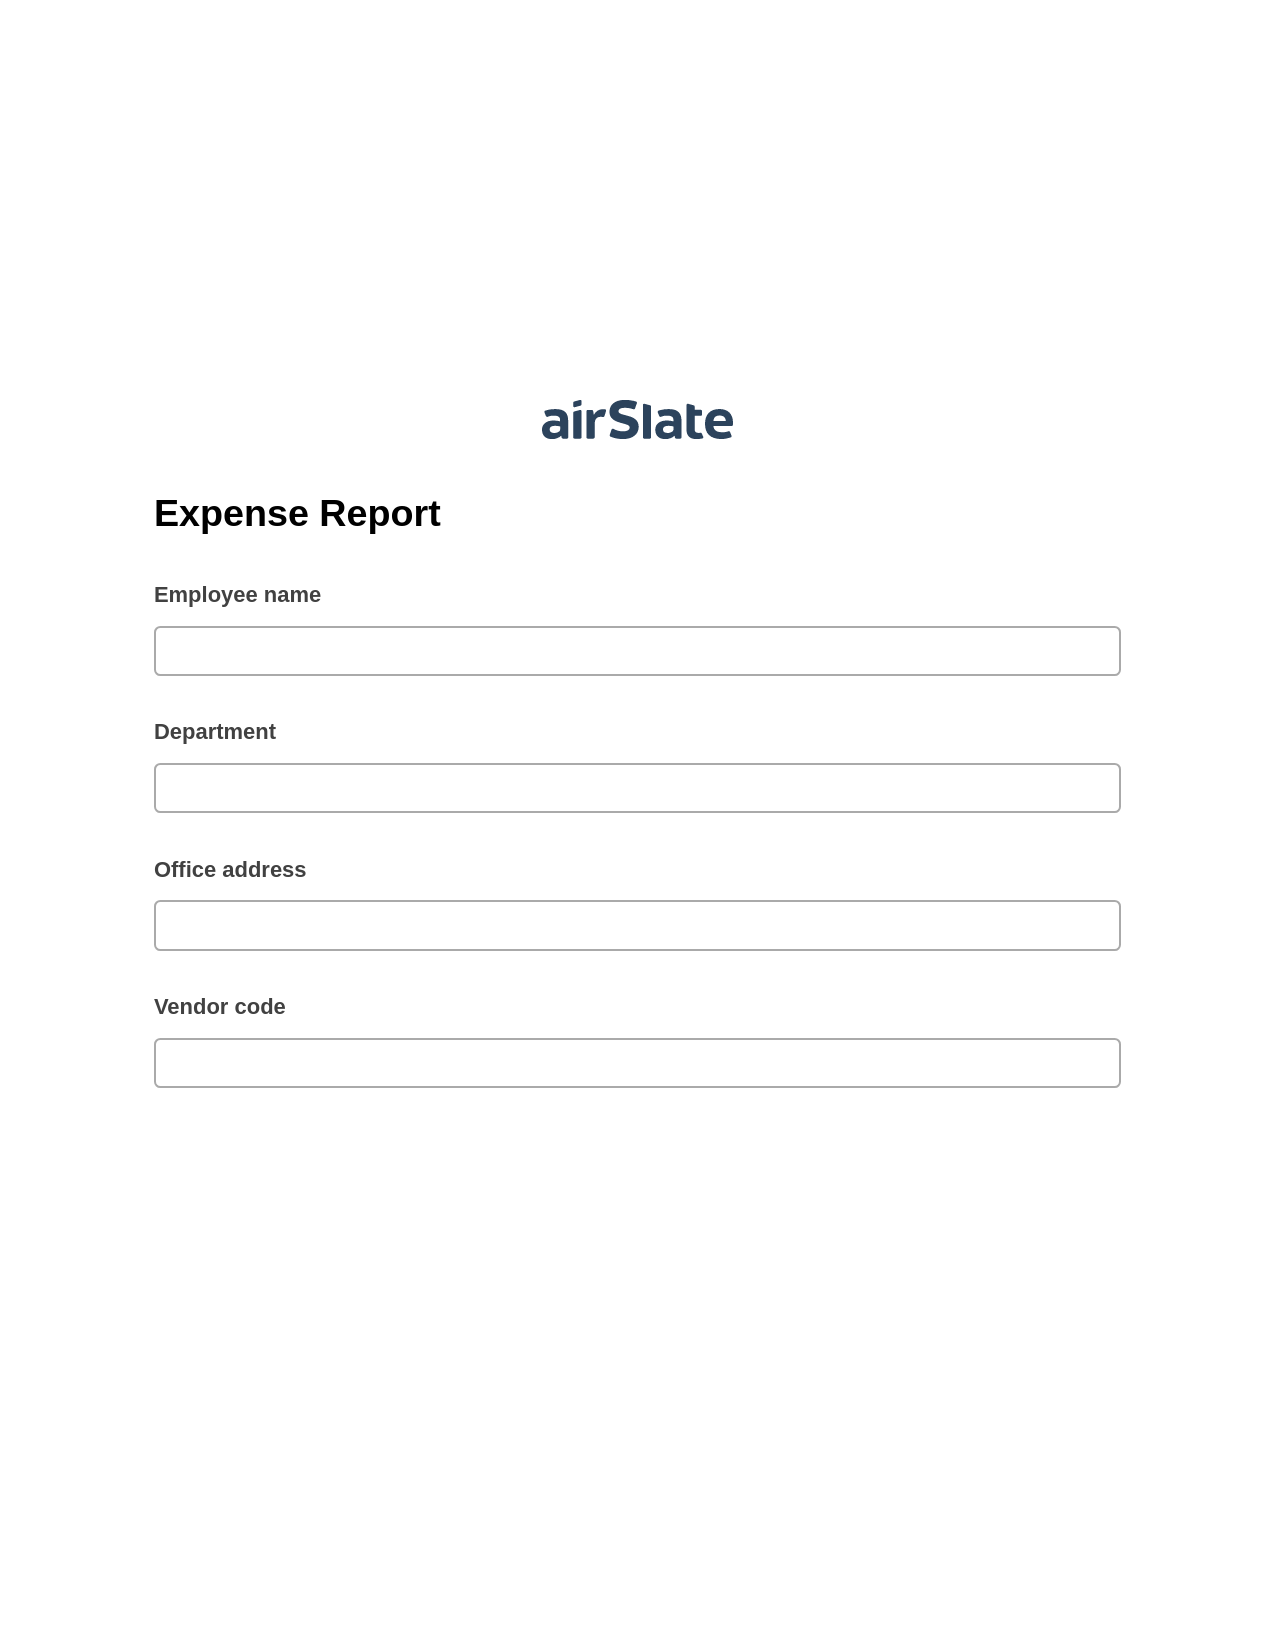 Expense Report Pre-fill Dropdown from Airtable, Hide Signatures Bot, Export to Excel 365 Bot